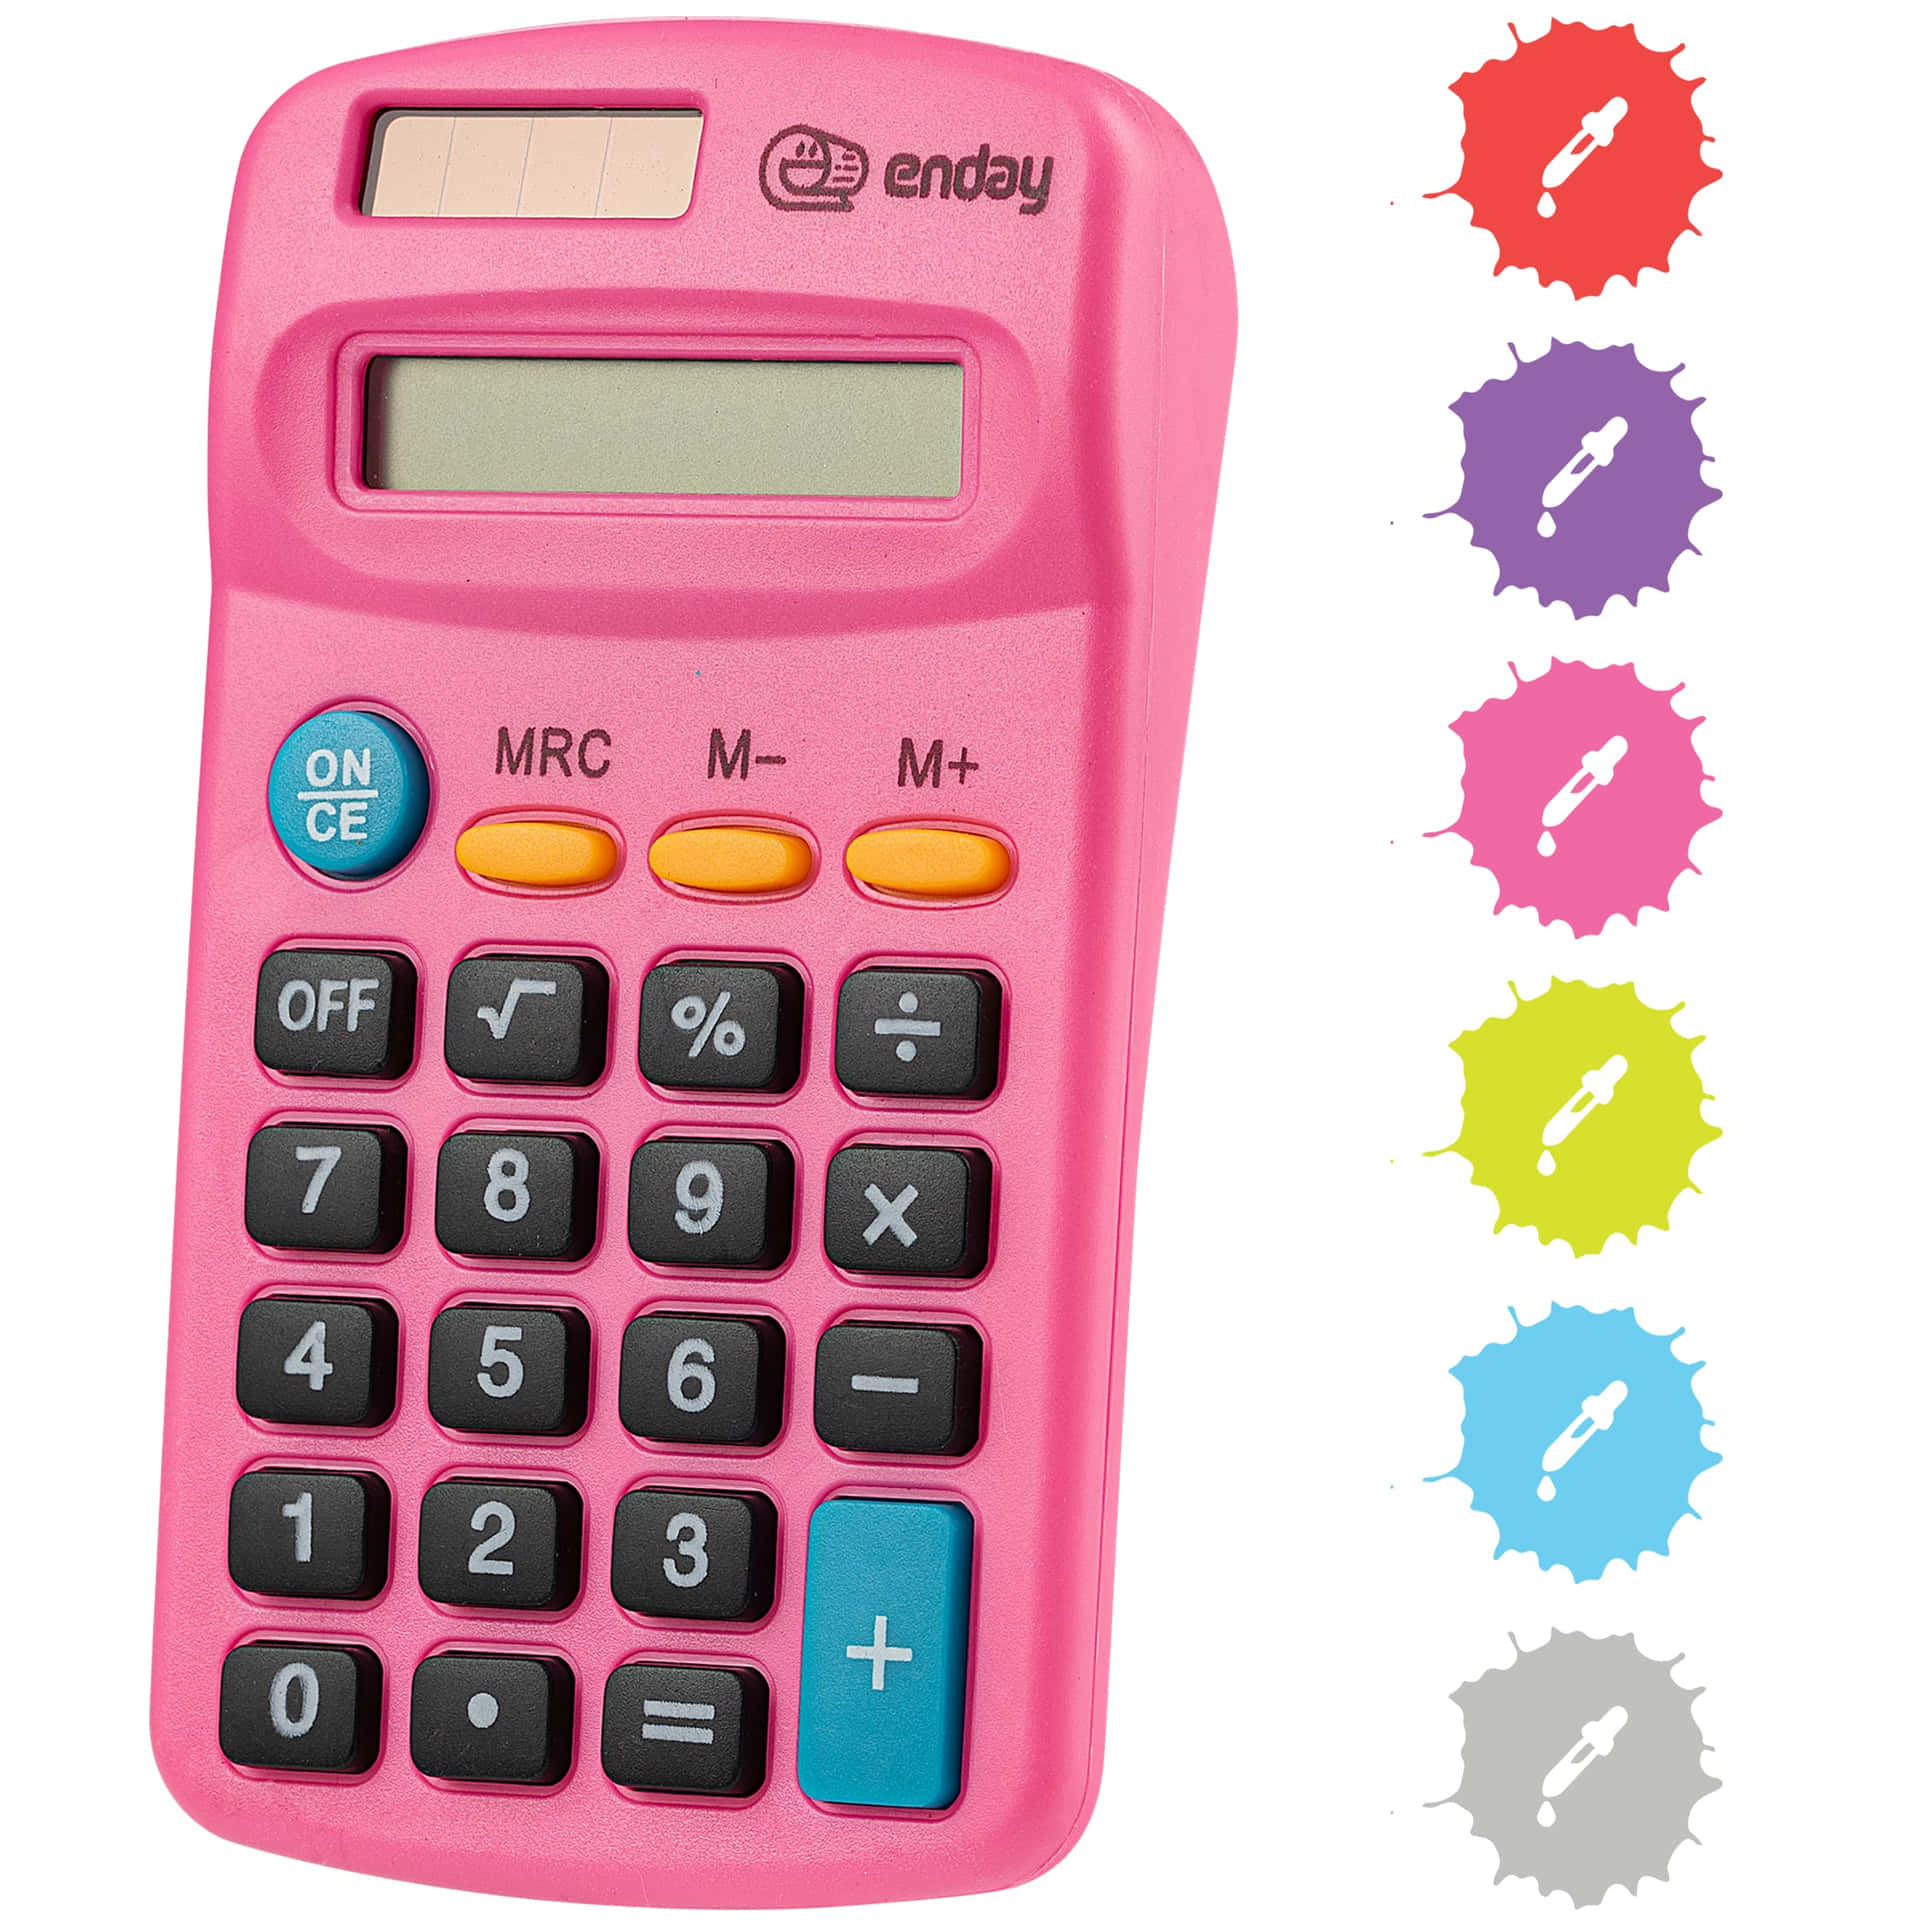 Advanced Calculator with Multi-Function Features